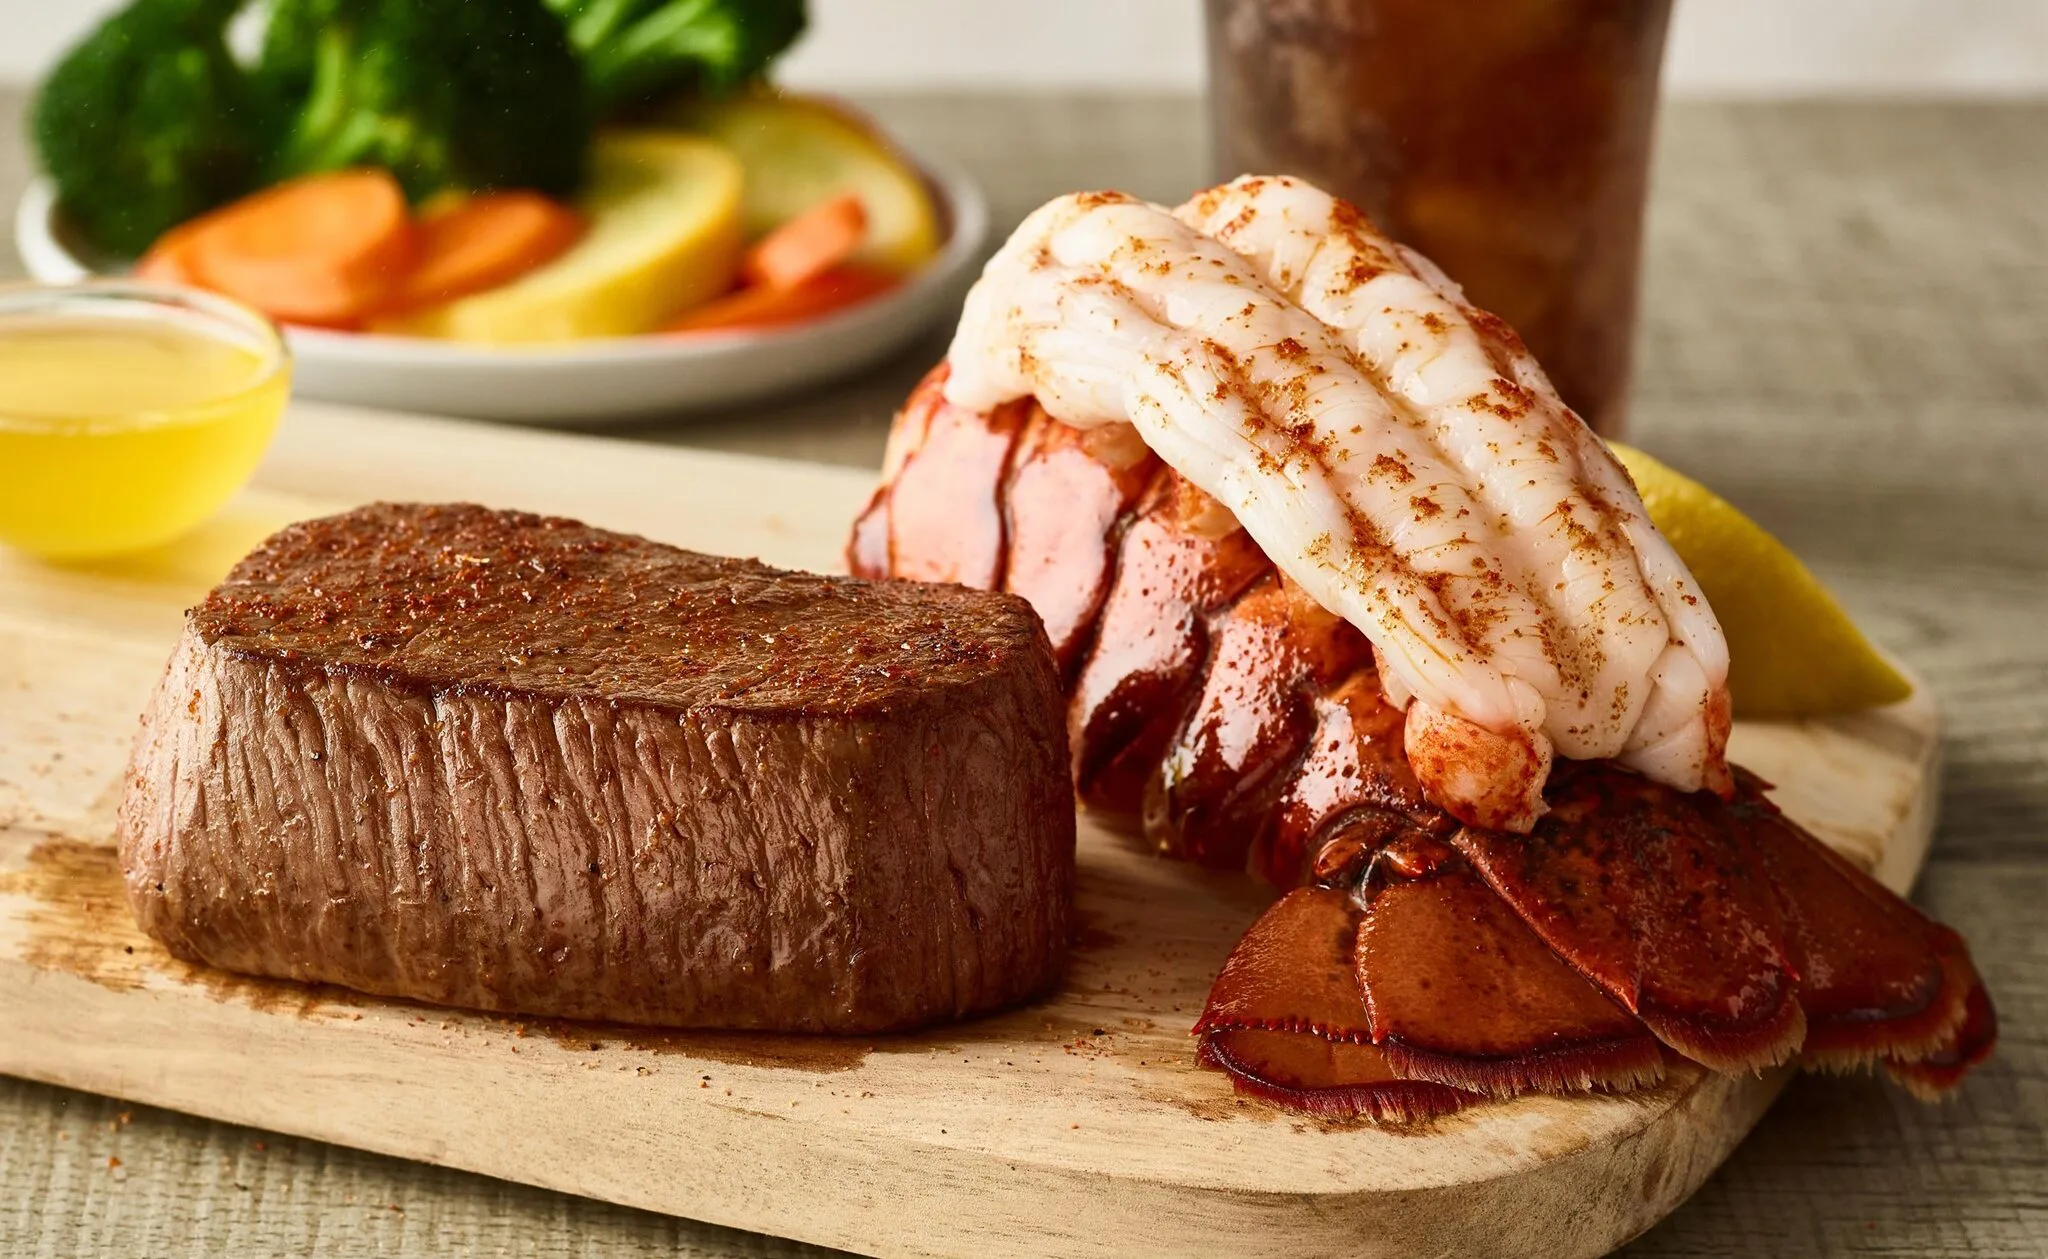 Outback Steakhouse $50 Gift Card US